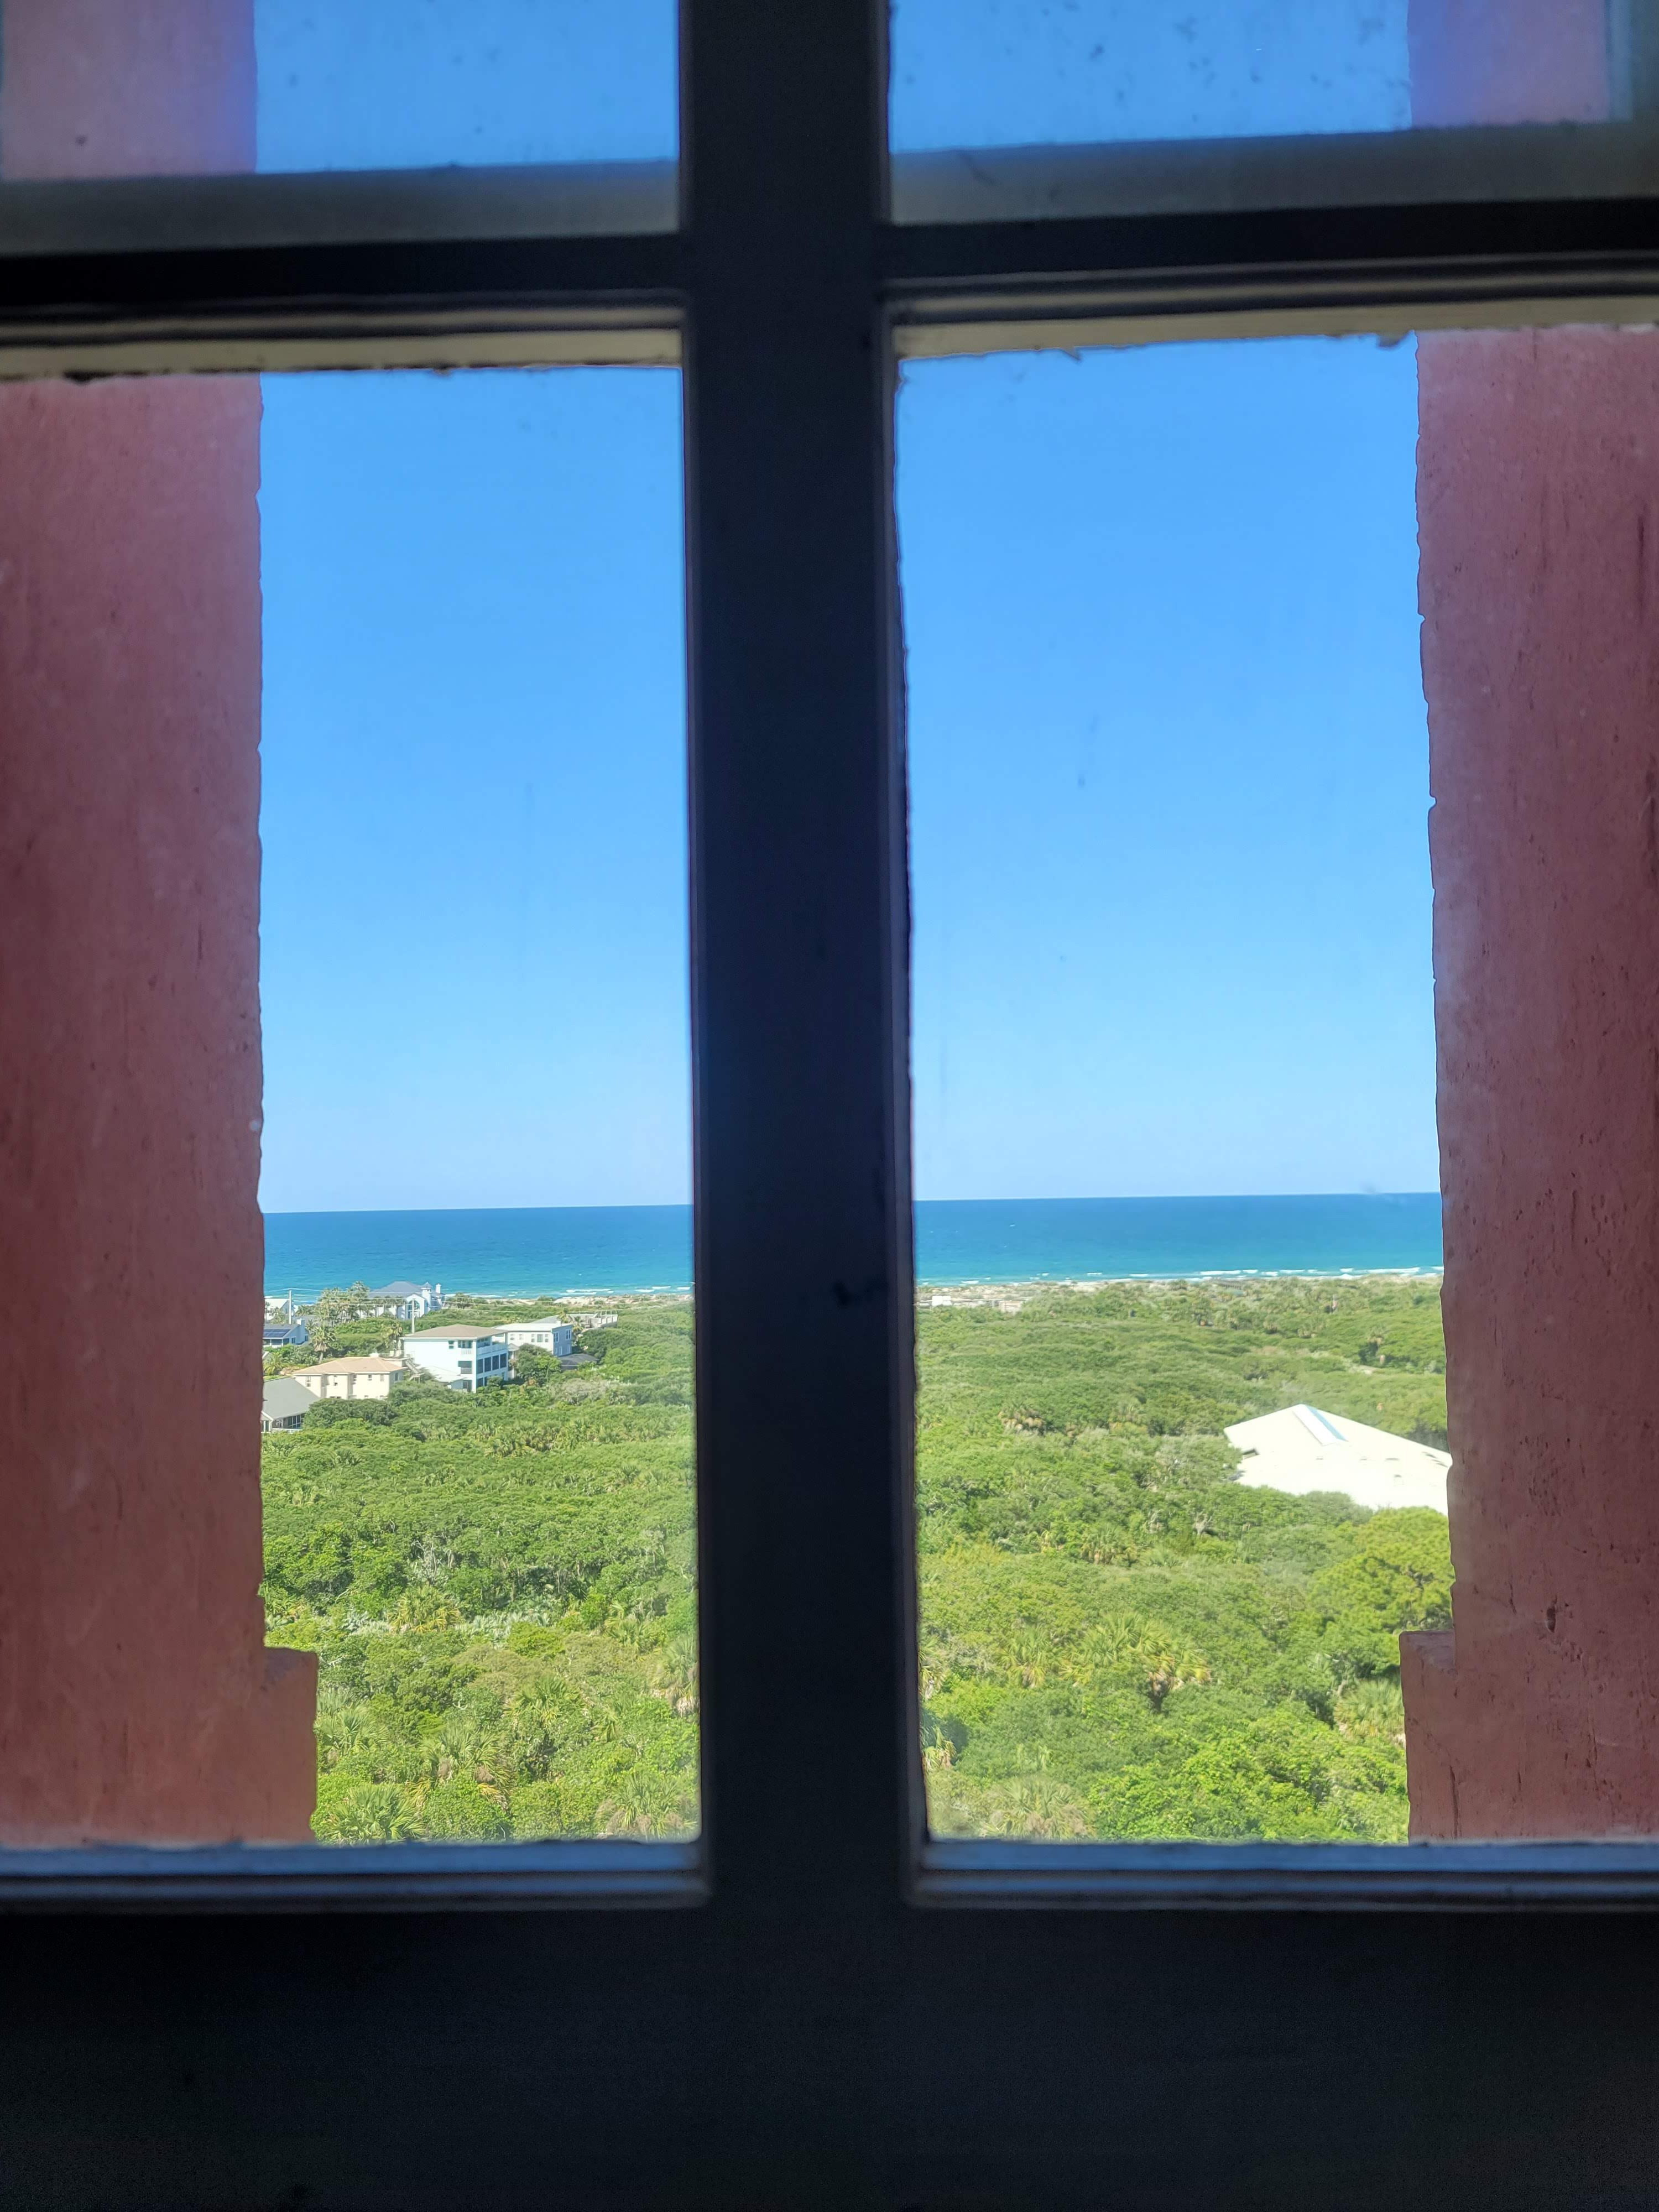 Ponce Inlet Lighthouse - Window view